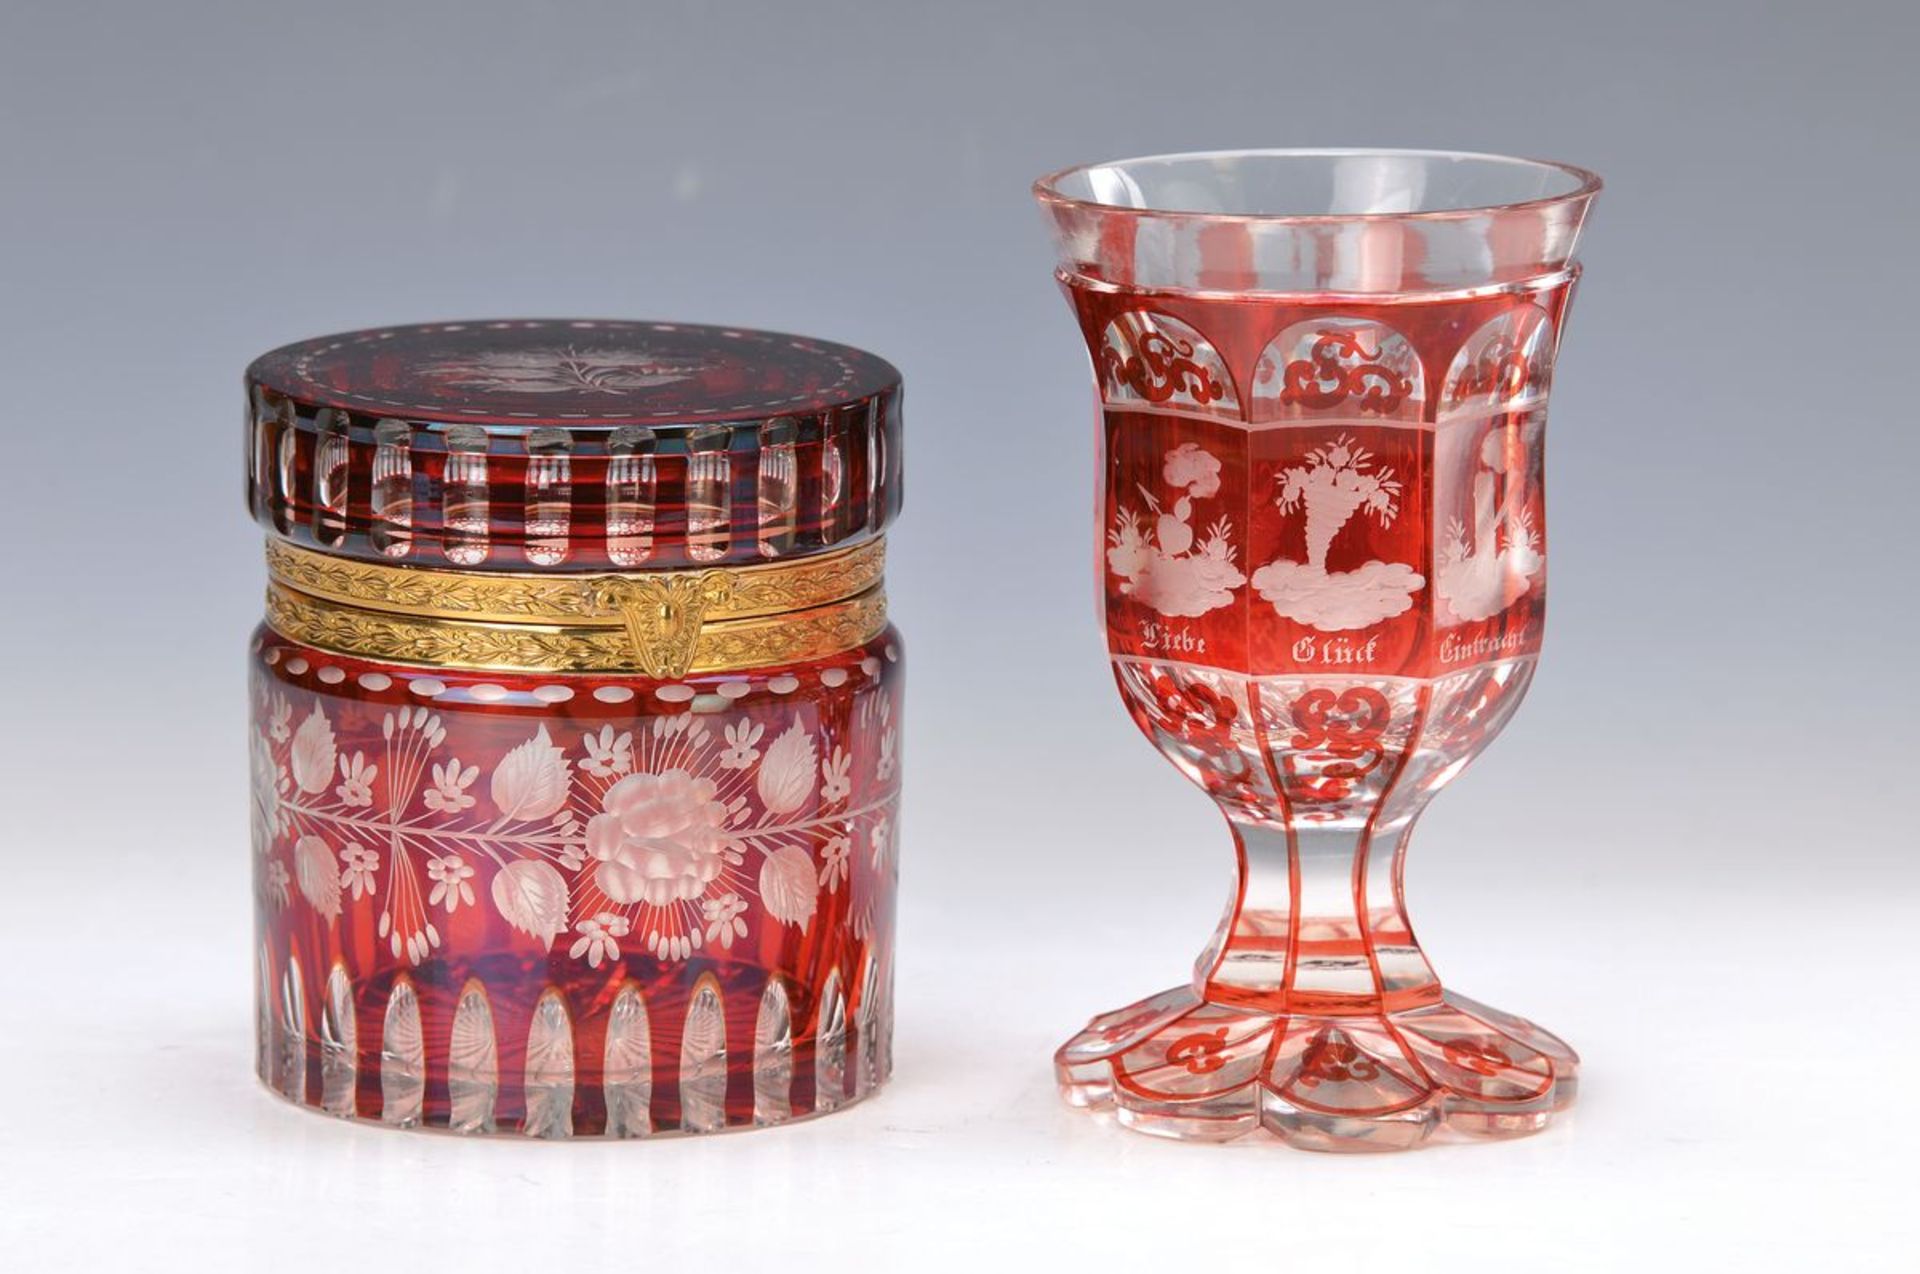 lid box and goblet, Bohemia, 19. and 20 th c.,colorless glass, ruby red: goblet with cut decor